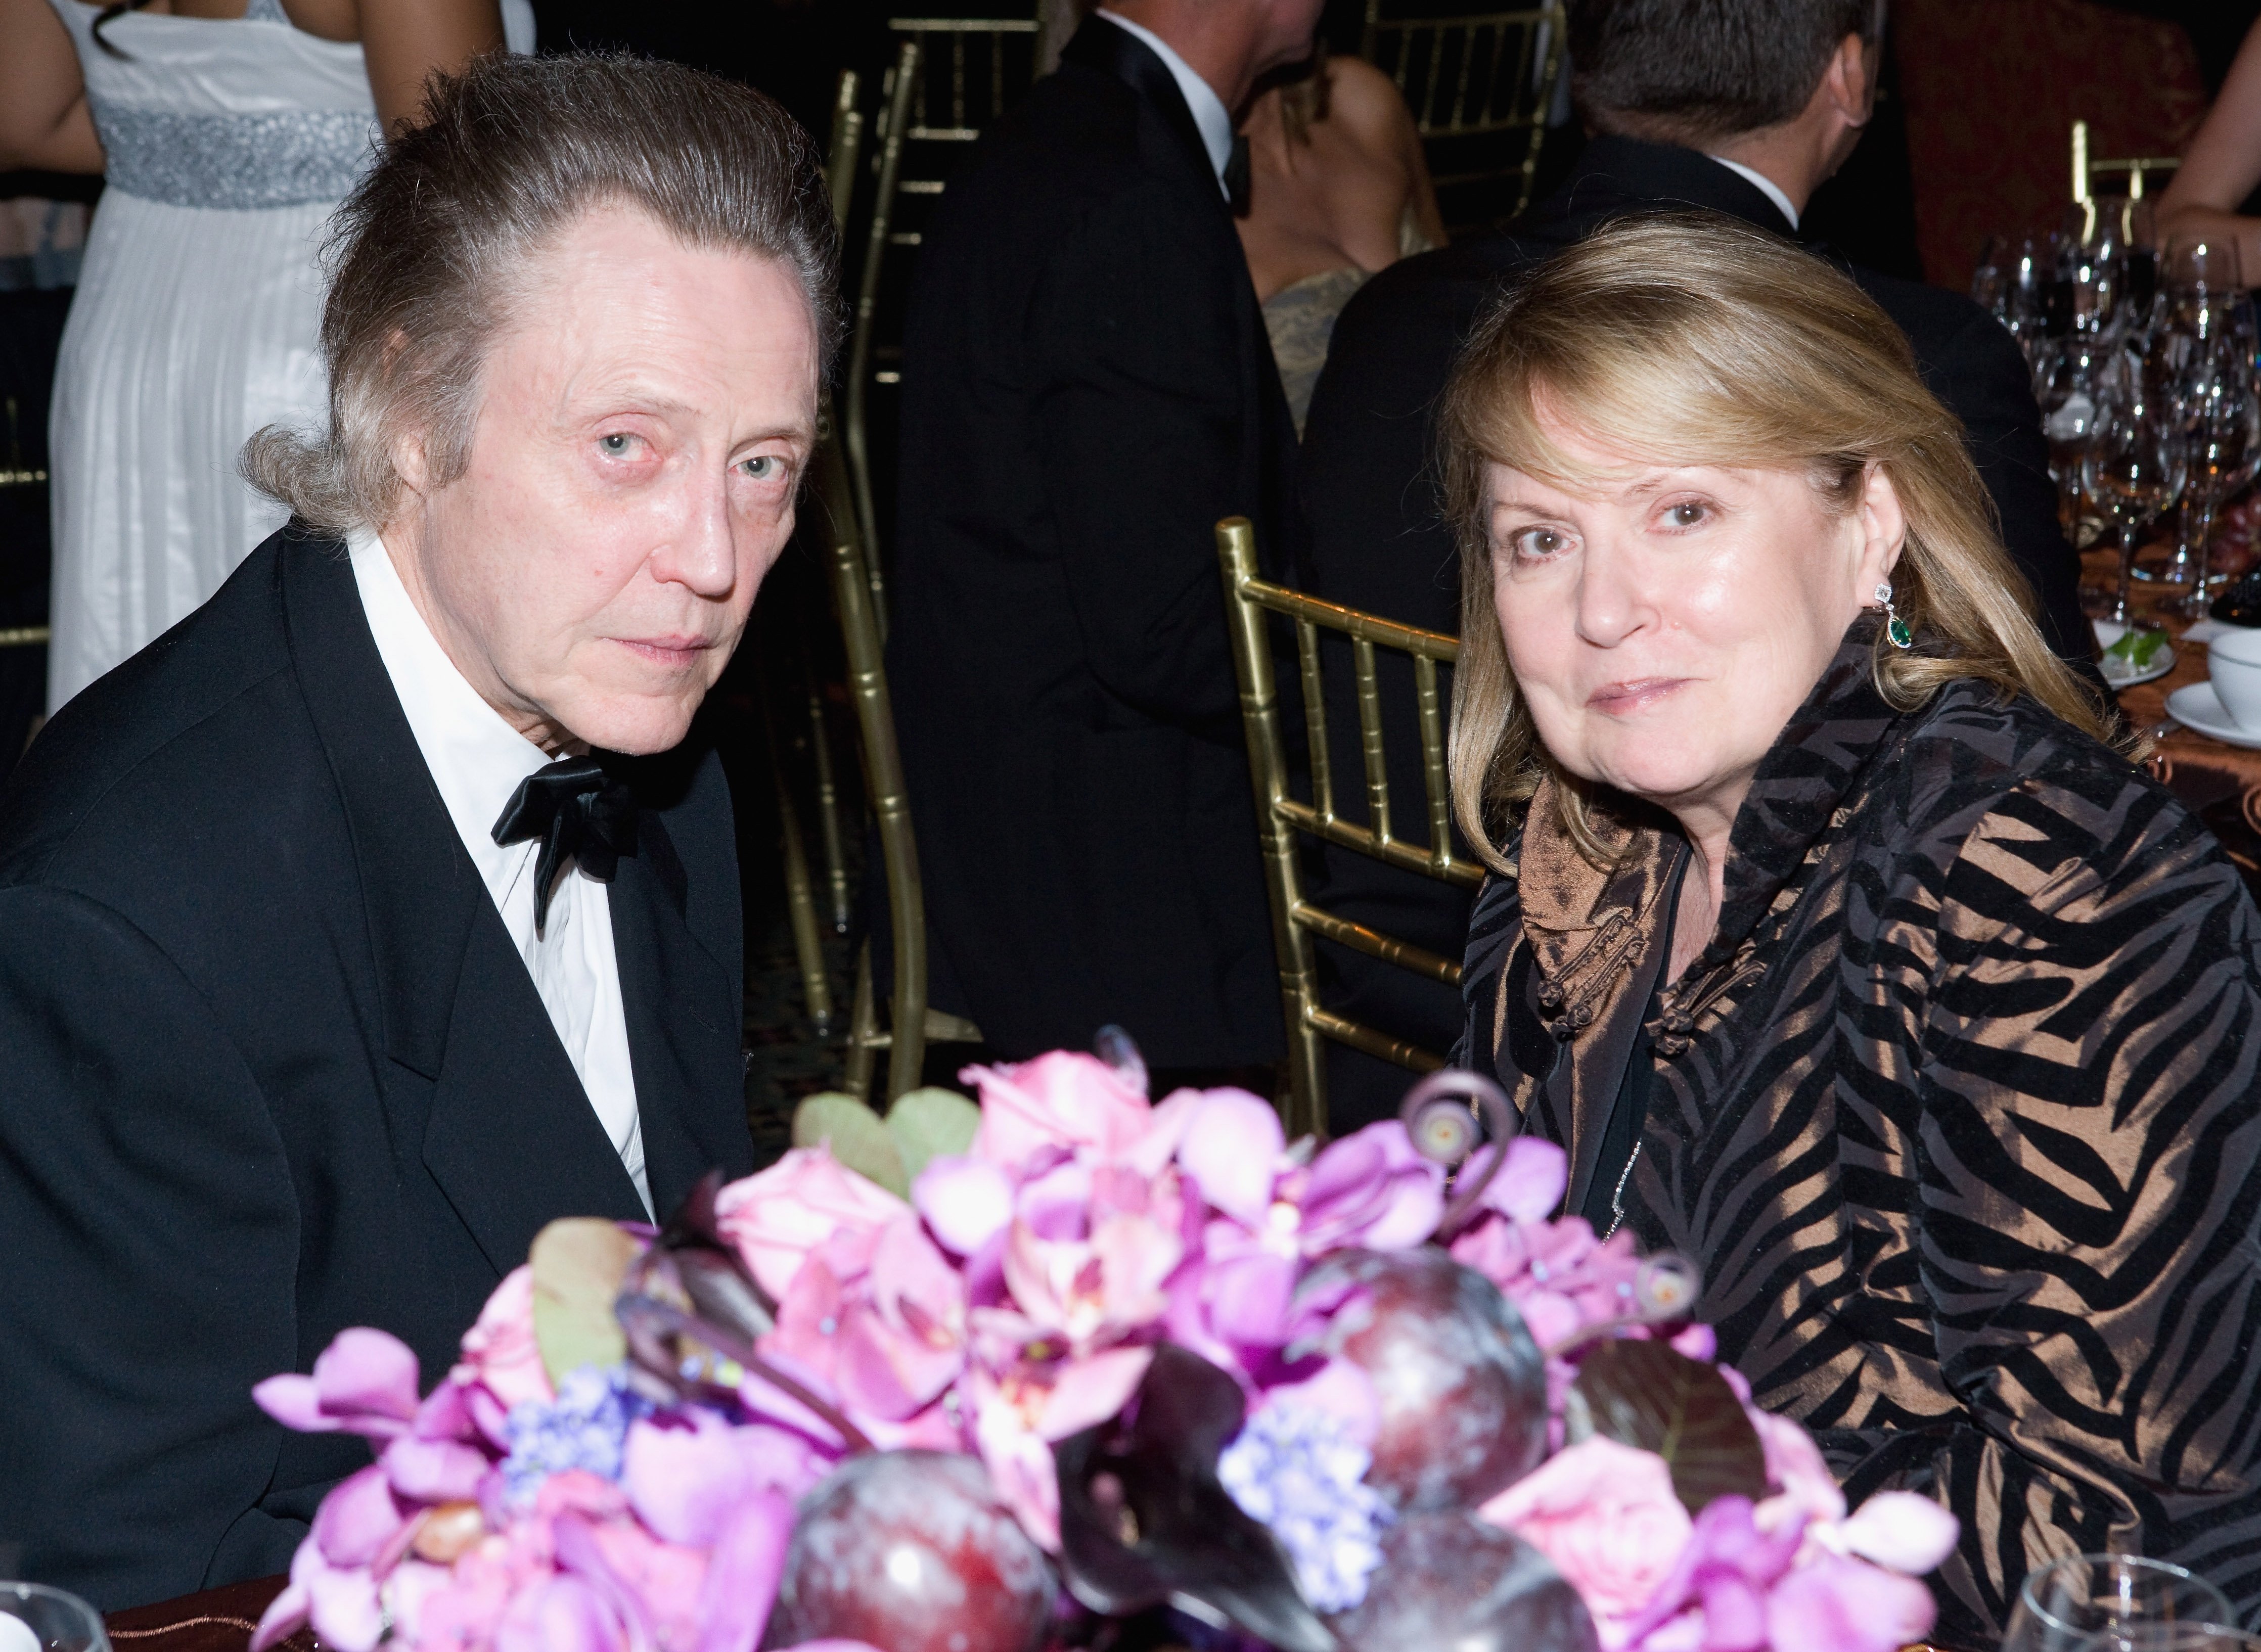 Christopher Walken and wife Georgianne Walken attend the 2008 Princess Grace Awards Gala at Cipriani 42nd Street on October 15, 2008 in New York City | Source: Getty Images